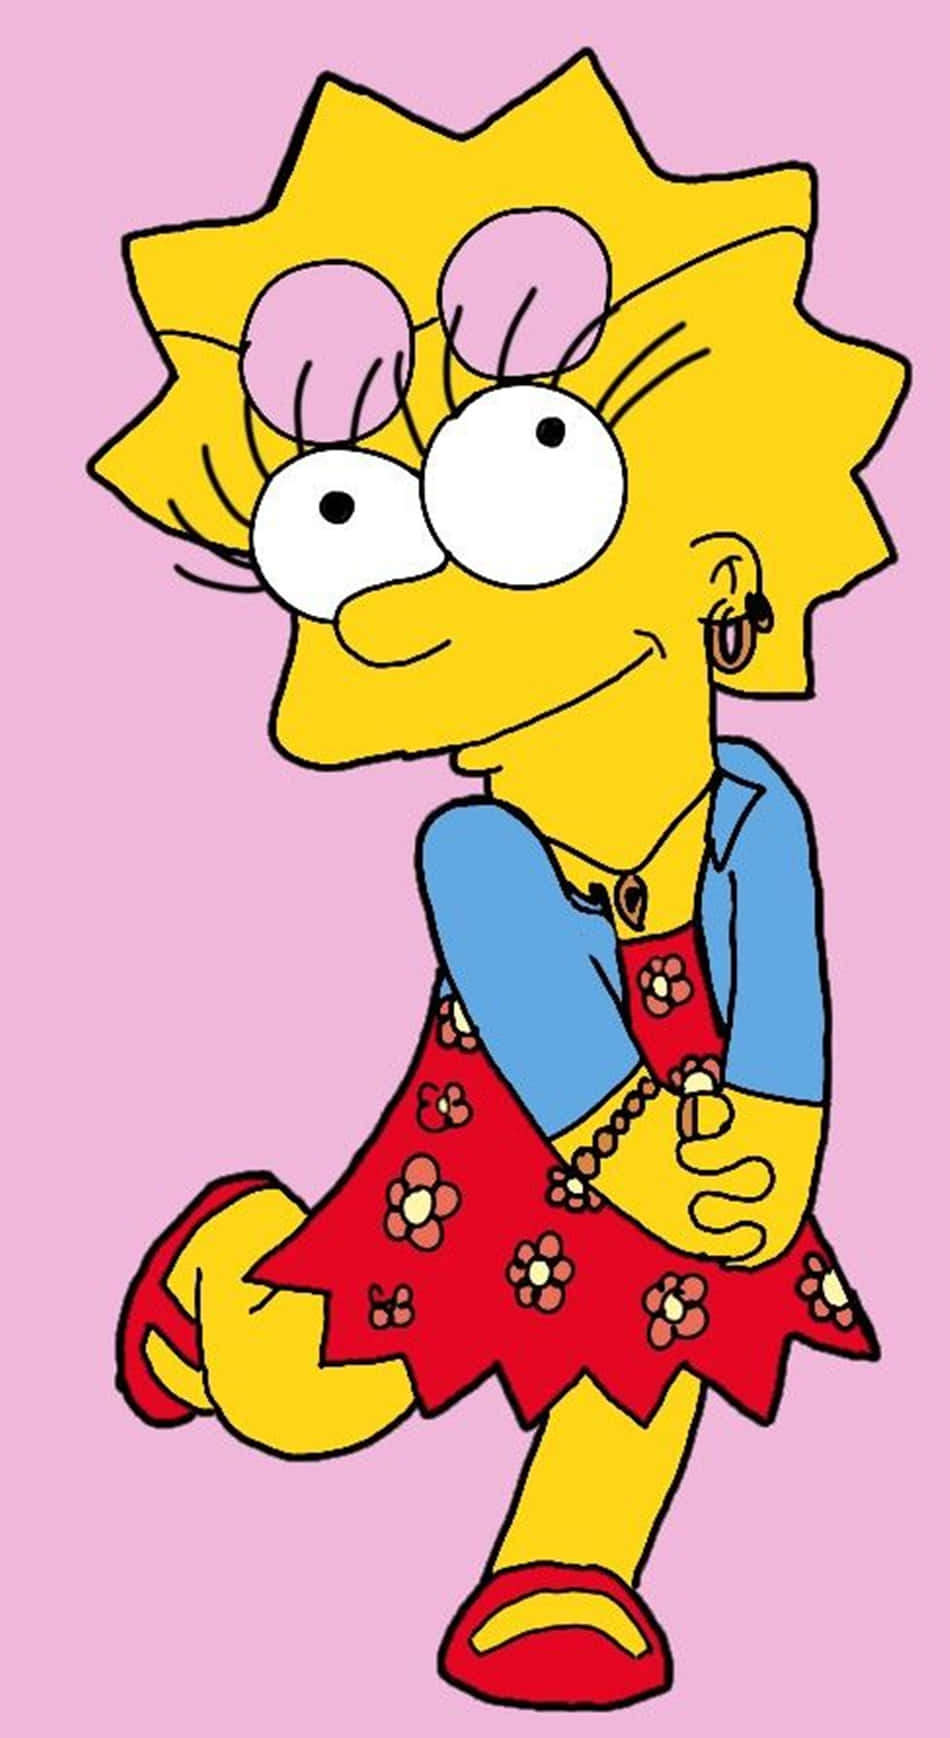 "The beauty of Lisa Simpson's aesthetic is for all to see" Wallpaper